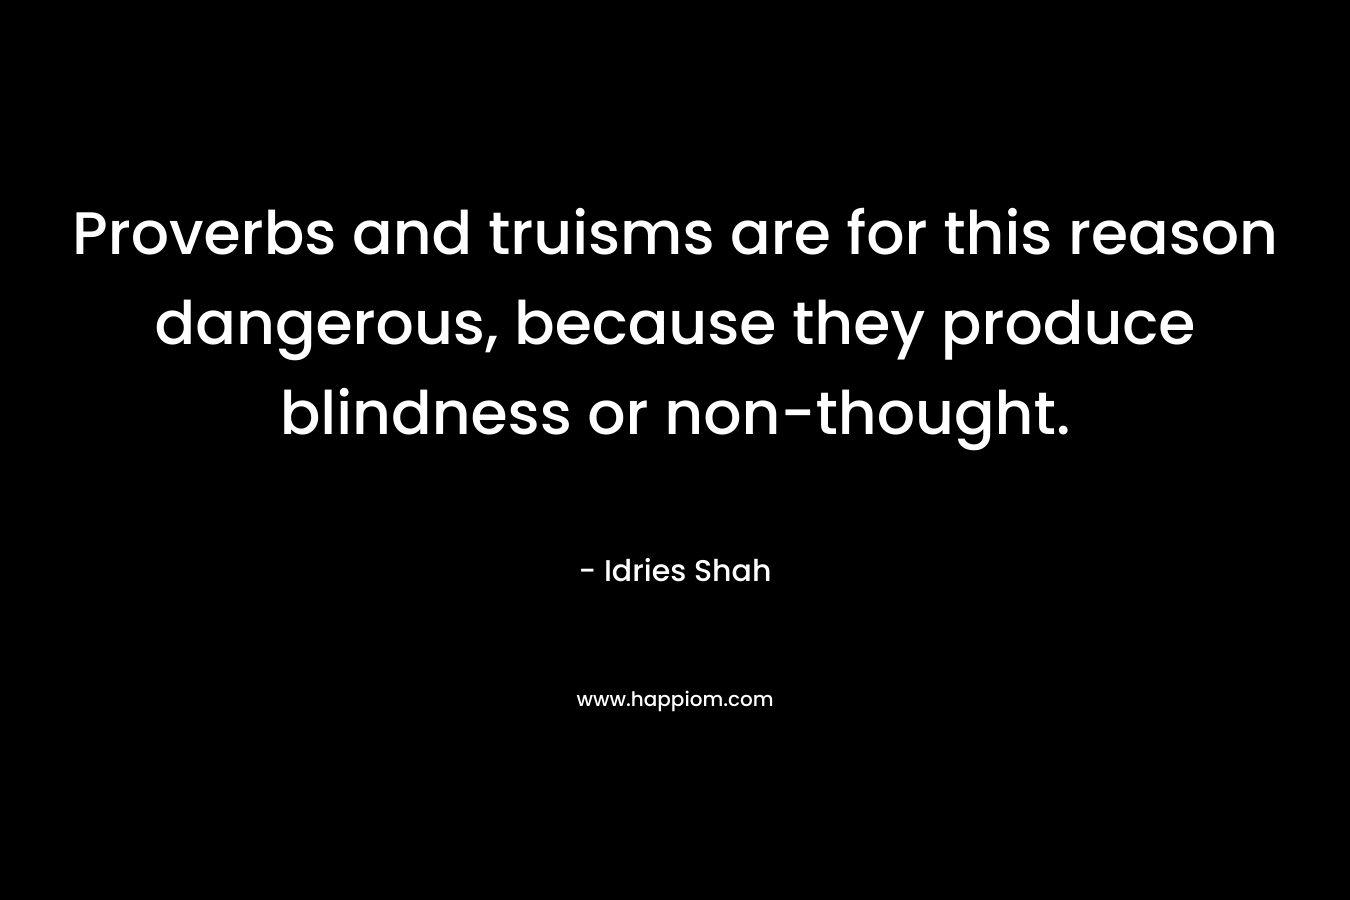 Proverbs and truisms are for this reason dangerous, because they produce blindness or non-thought. – Idries Shah